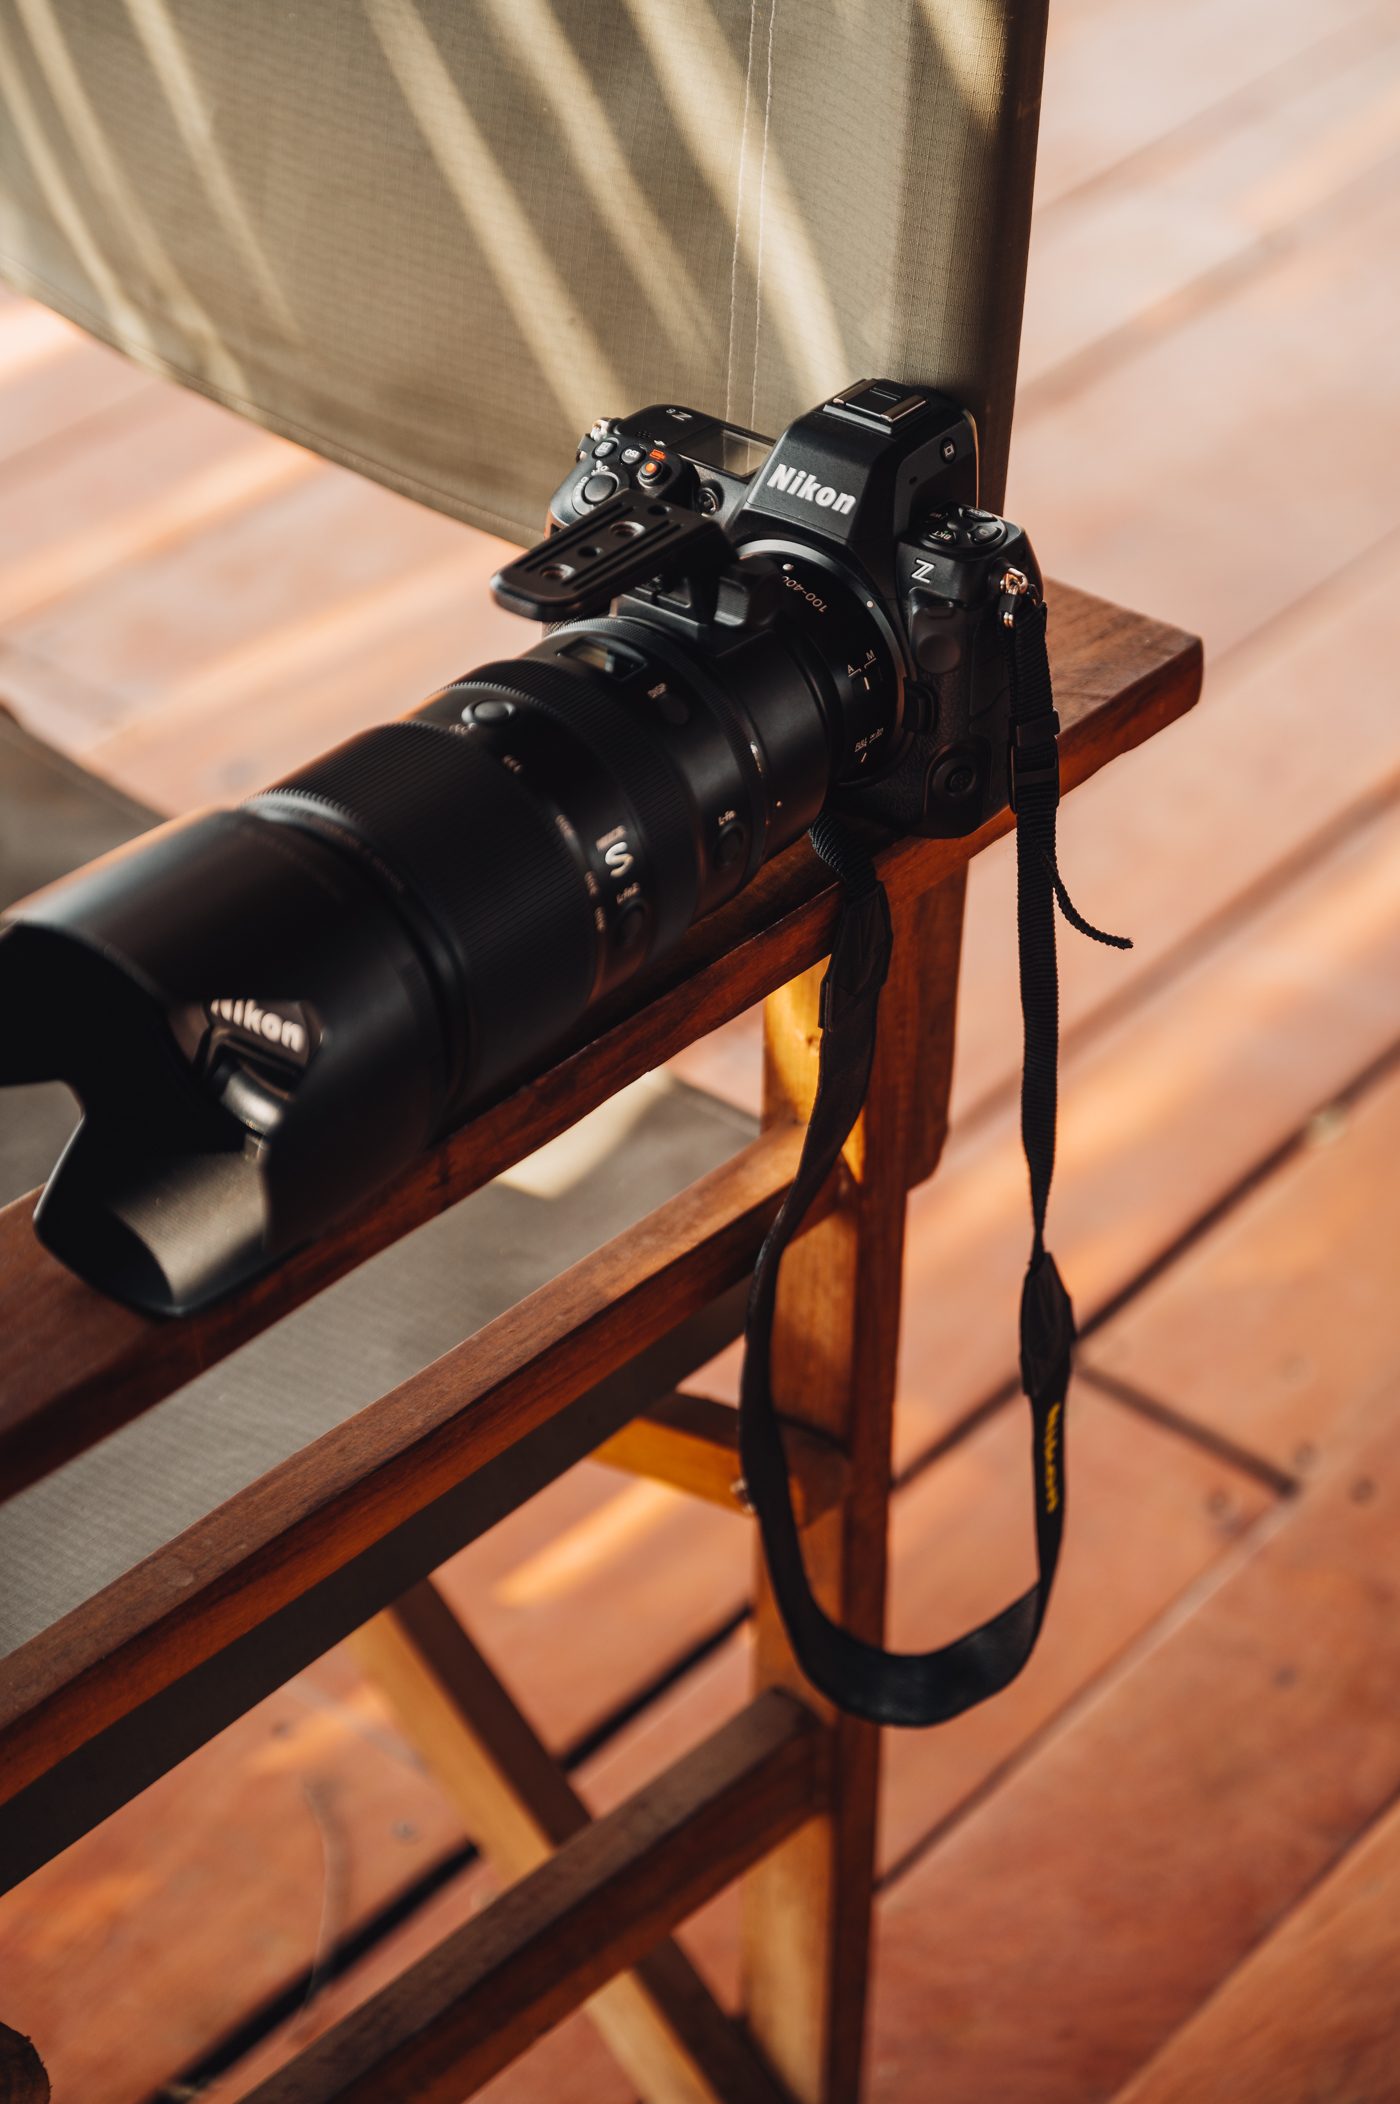 Nikon Z 8 and a 100-400mm tele zoom lens - camera recommendation for a safari